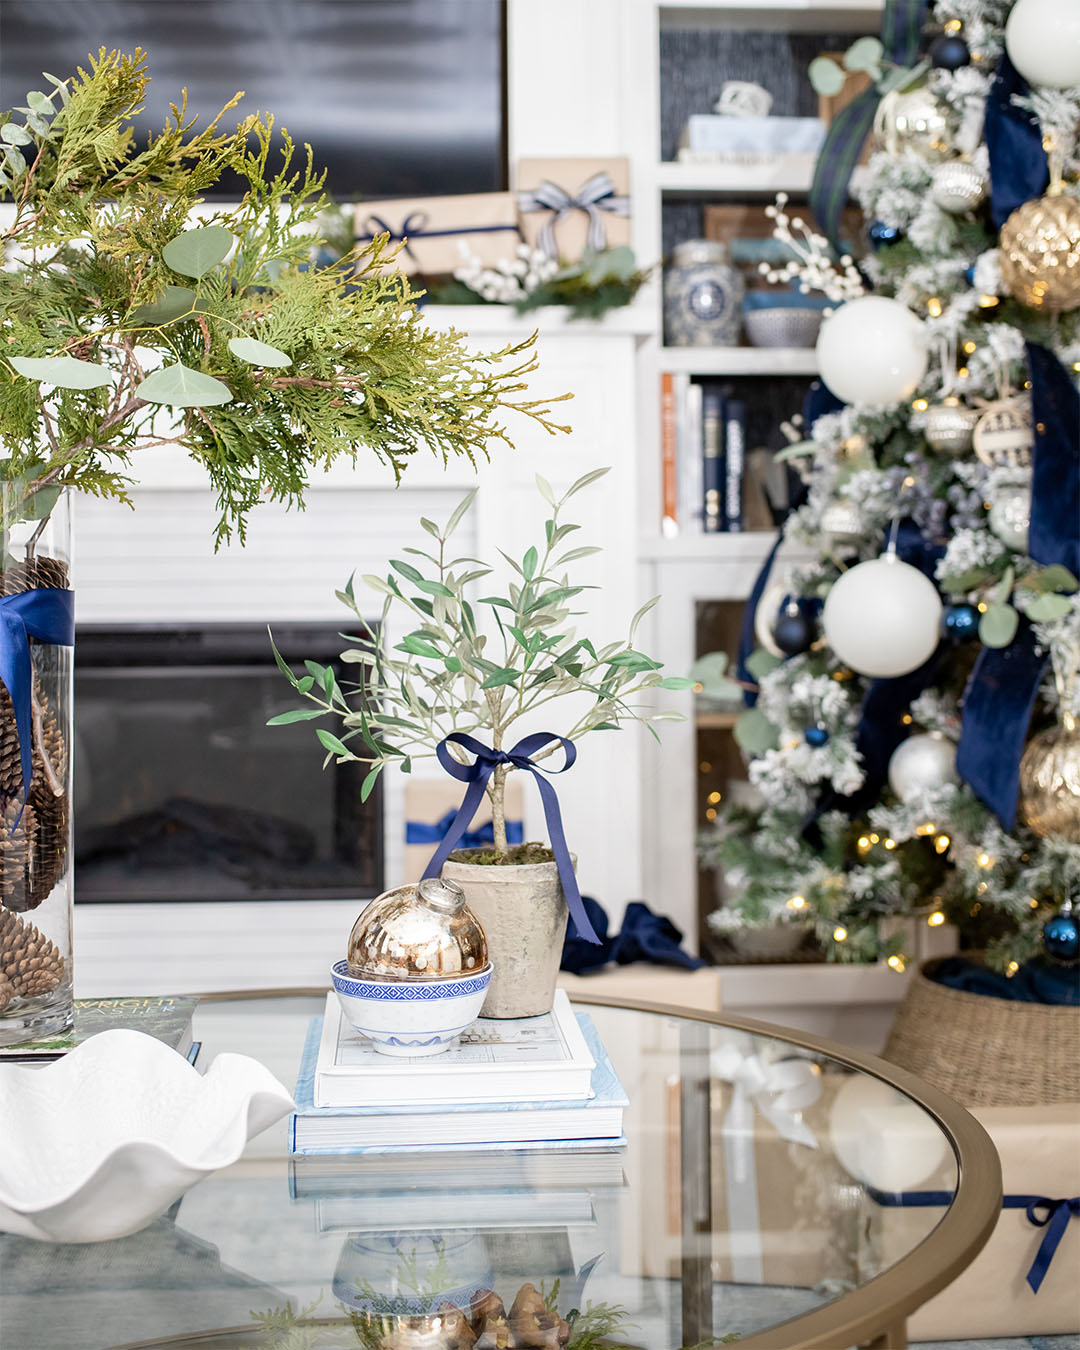 Blue and White Christmas Decor in Our Living Room - The Creek Line House